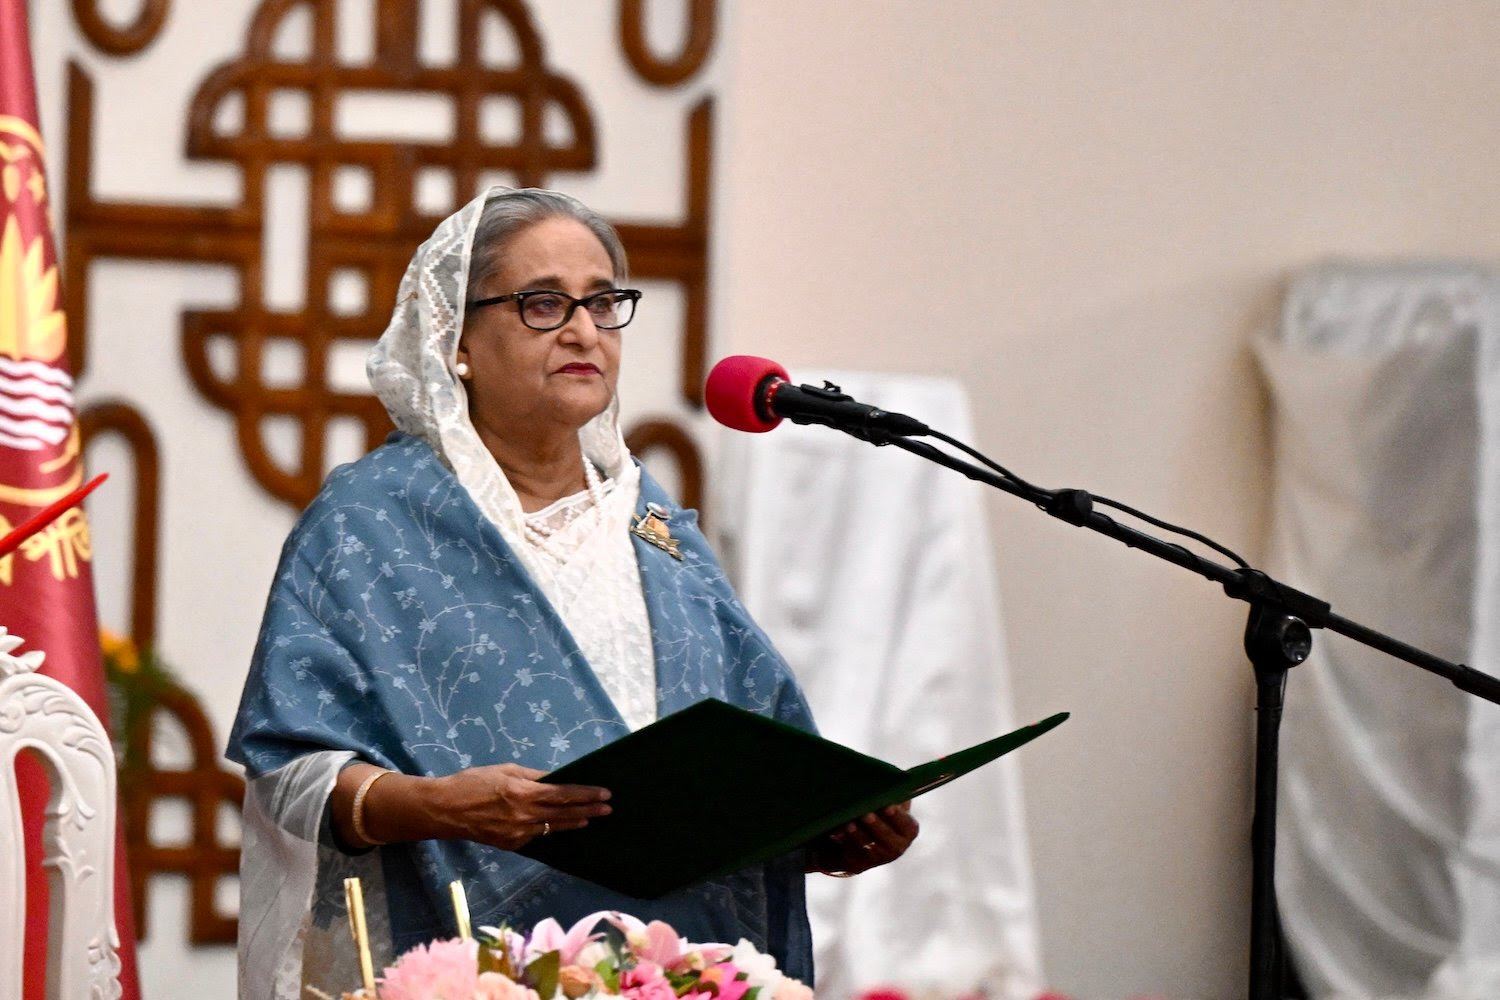 Bangladeshi Prime Minister Sheikh Hasina speaks as she is sworn in for a fifth term in Dhaka, Bangladesh, on Jan. 11.